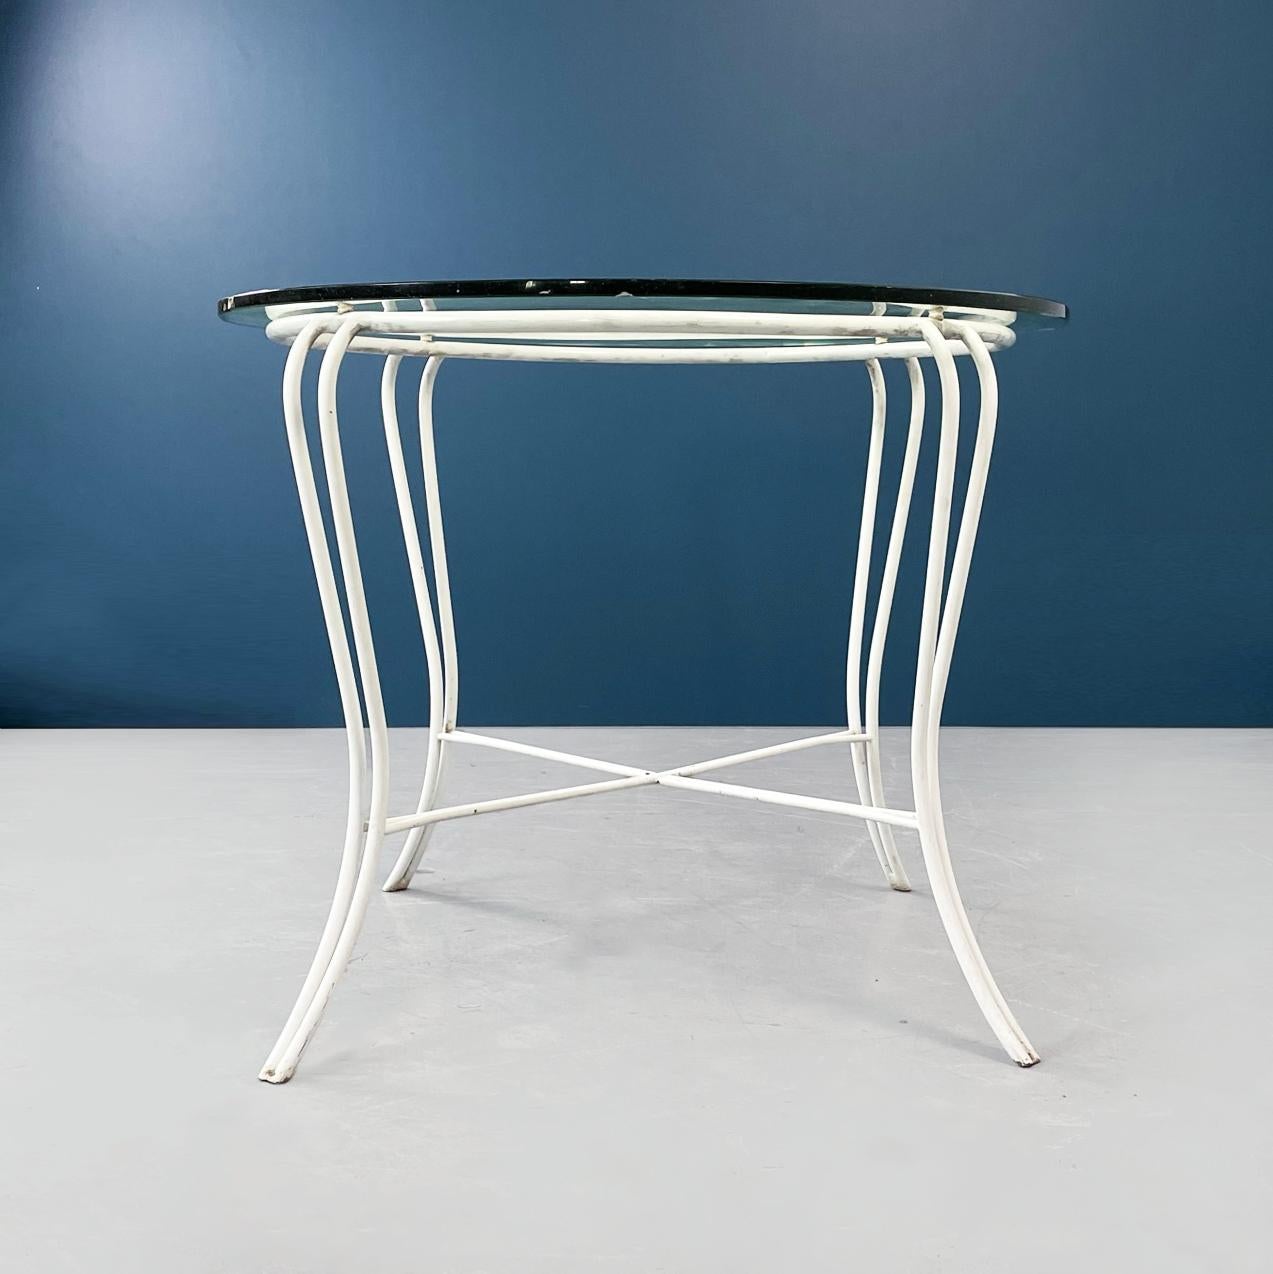 Italian mid-century Garden table in white wrought iron and glass, 1960s
Garden table with white painted wrought iron structure. The legs are finely worked. The round top, in thick glass in aquamarine green, is leaning on the structure.
1960s
Good